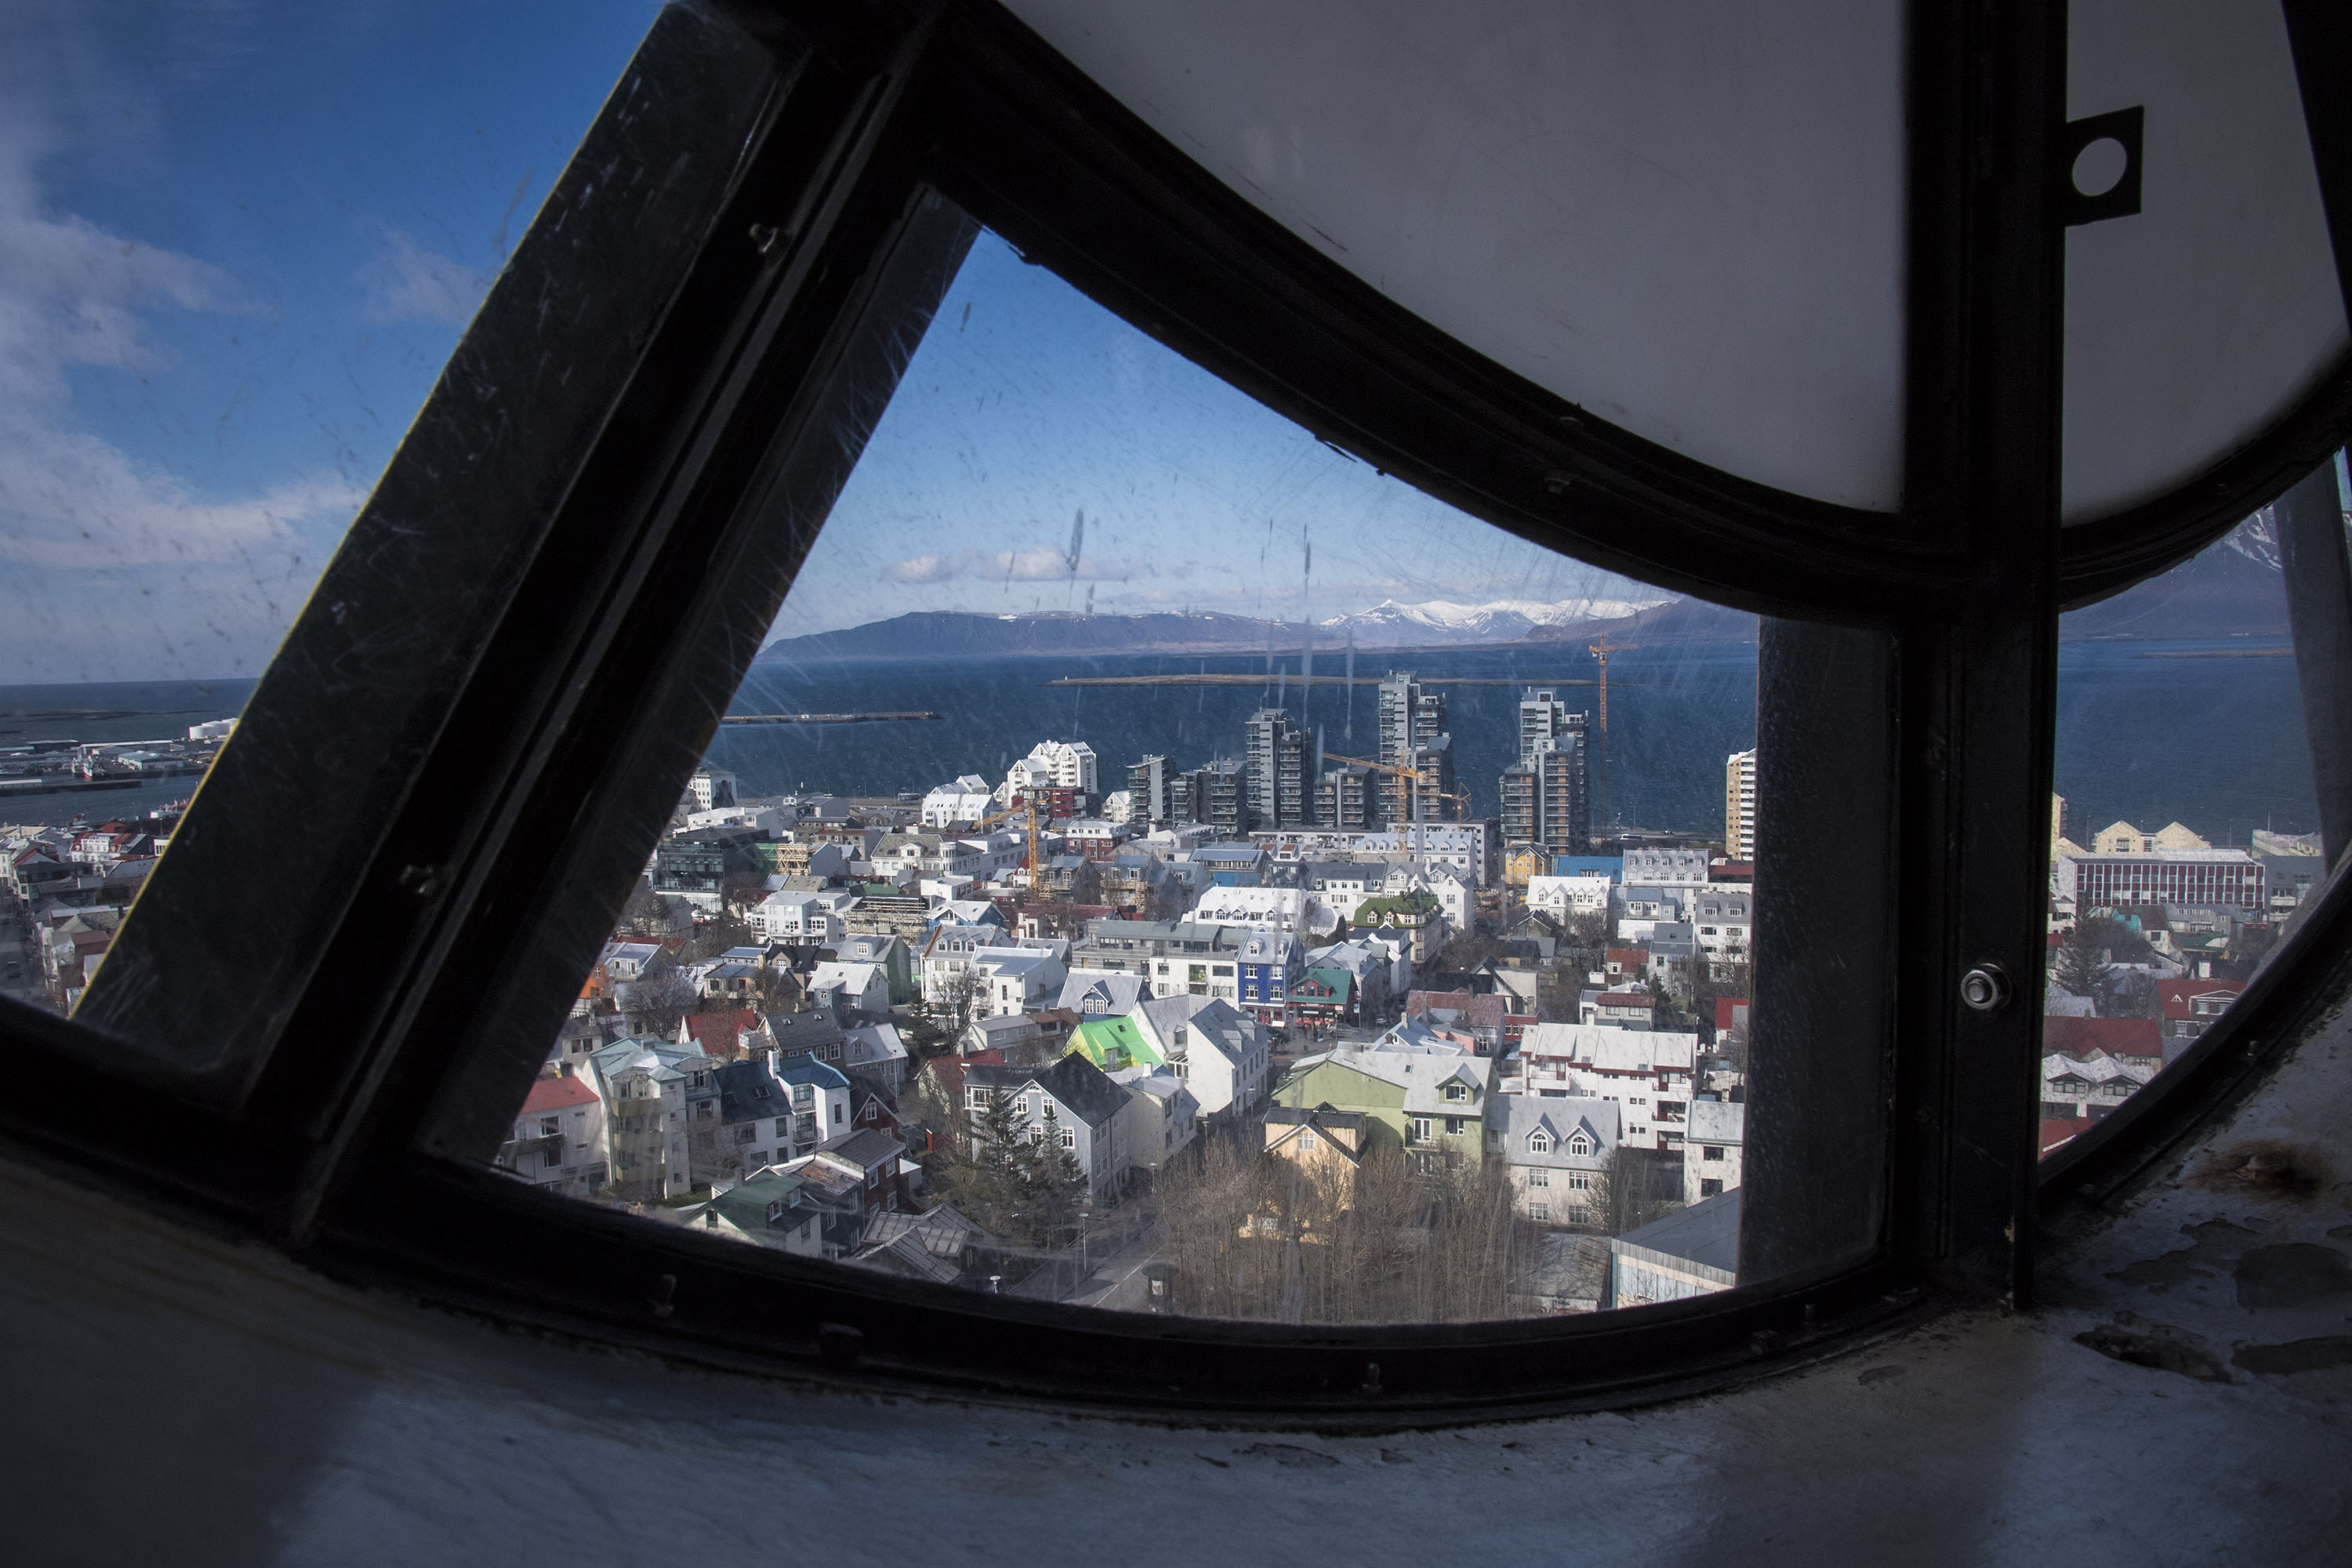 The view of buildings in downtown Reykjavík are seen from the top of Hallgrímskirkja, a Lutheran church which is also the national church of Iceland, on April 27. More than 60 percent of the country's population lives in or near by the coastal capital city. (Jabin Botsford / The Washington Post)